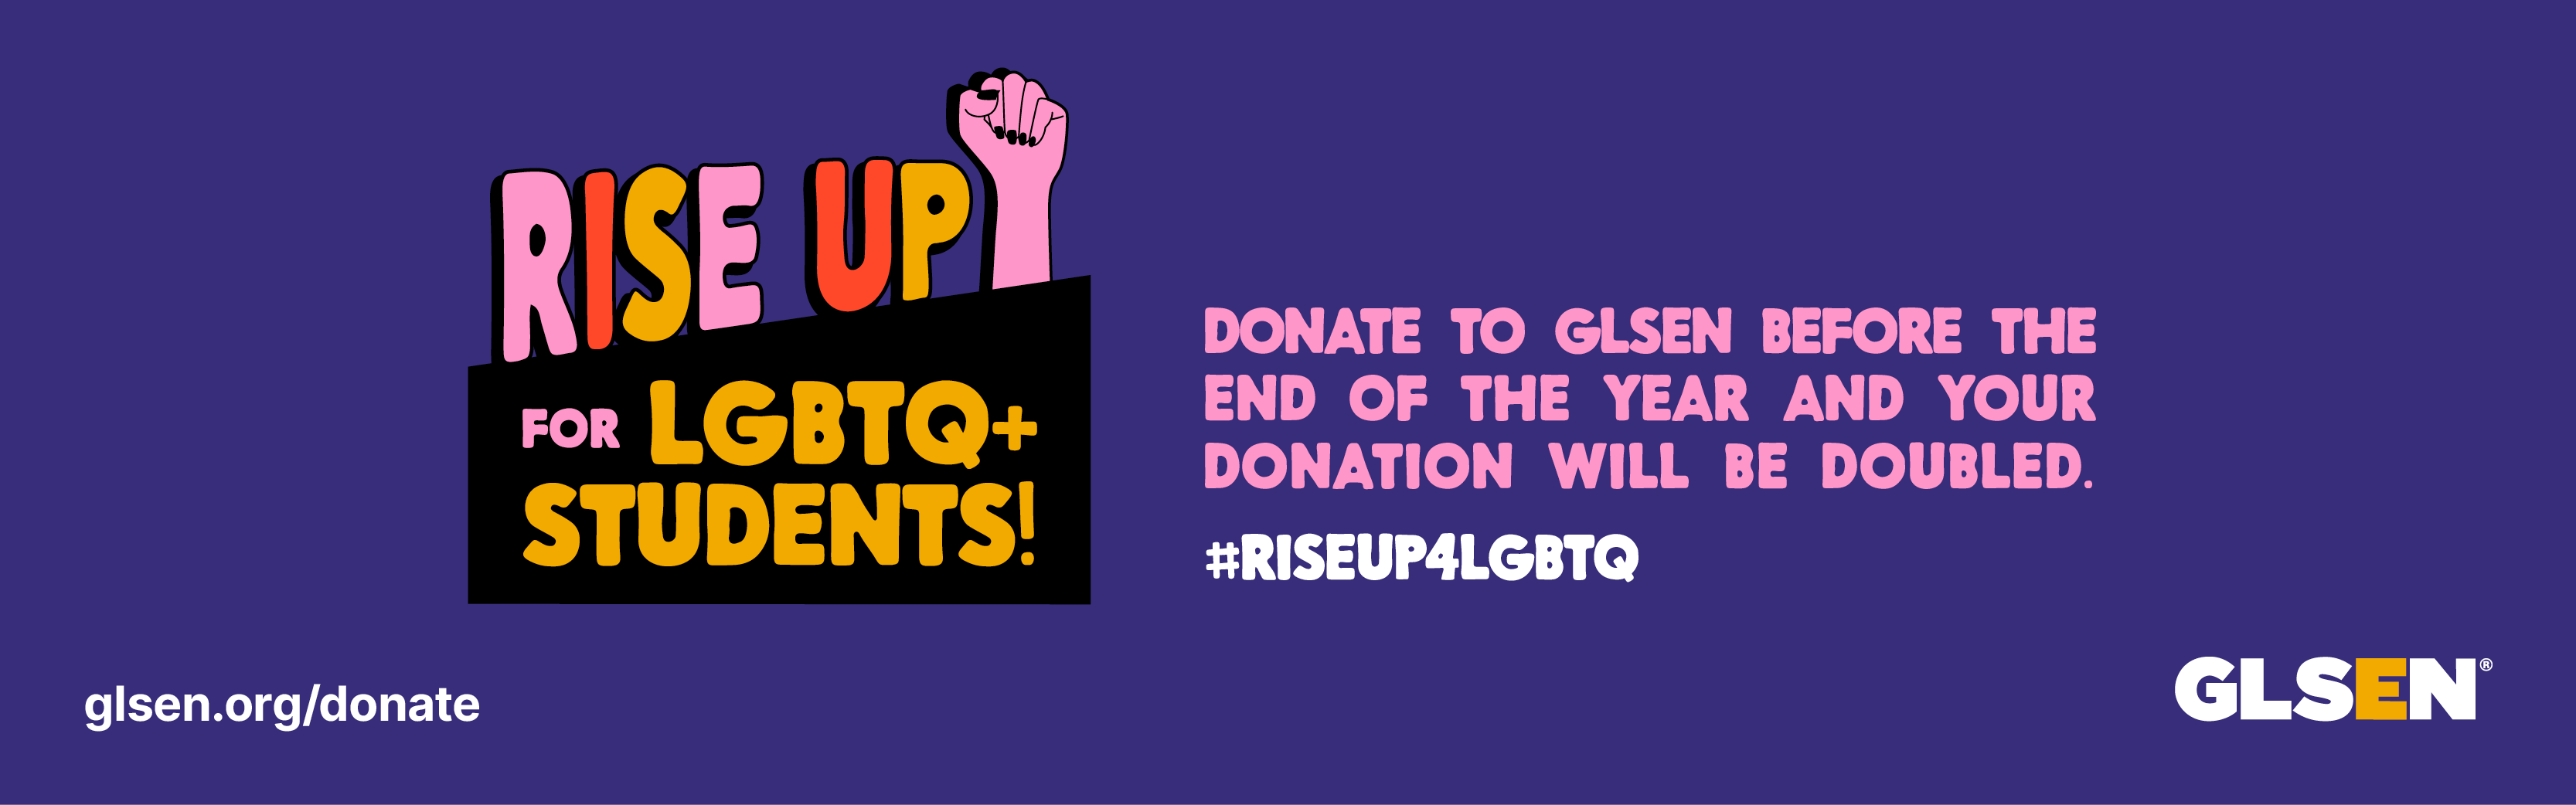 Purple background with graphic that says "Rise Up for LGBTQ+ Students!" and then "Donate to GLSEN before the end of the year and your donation will be doubled."